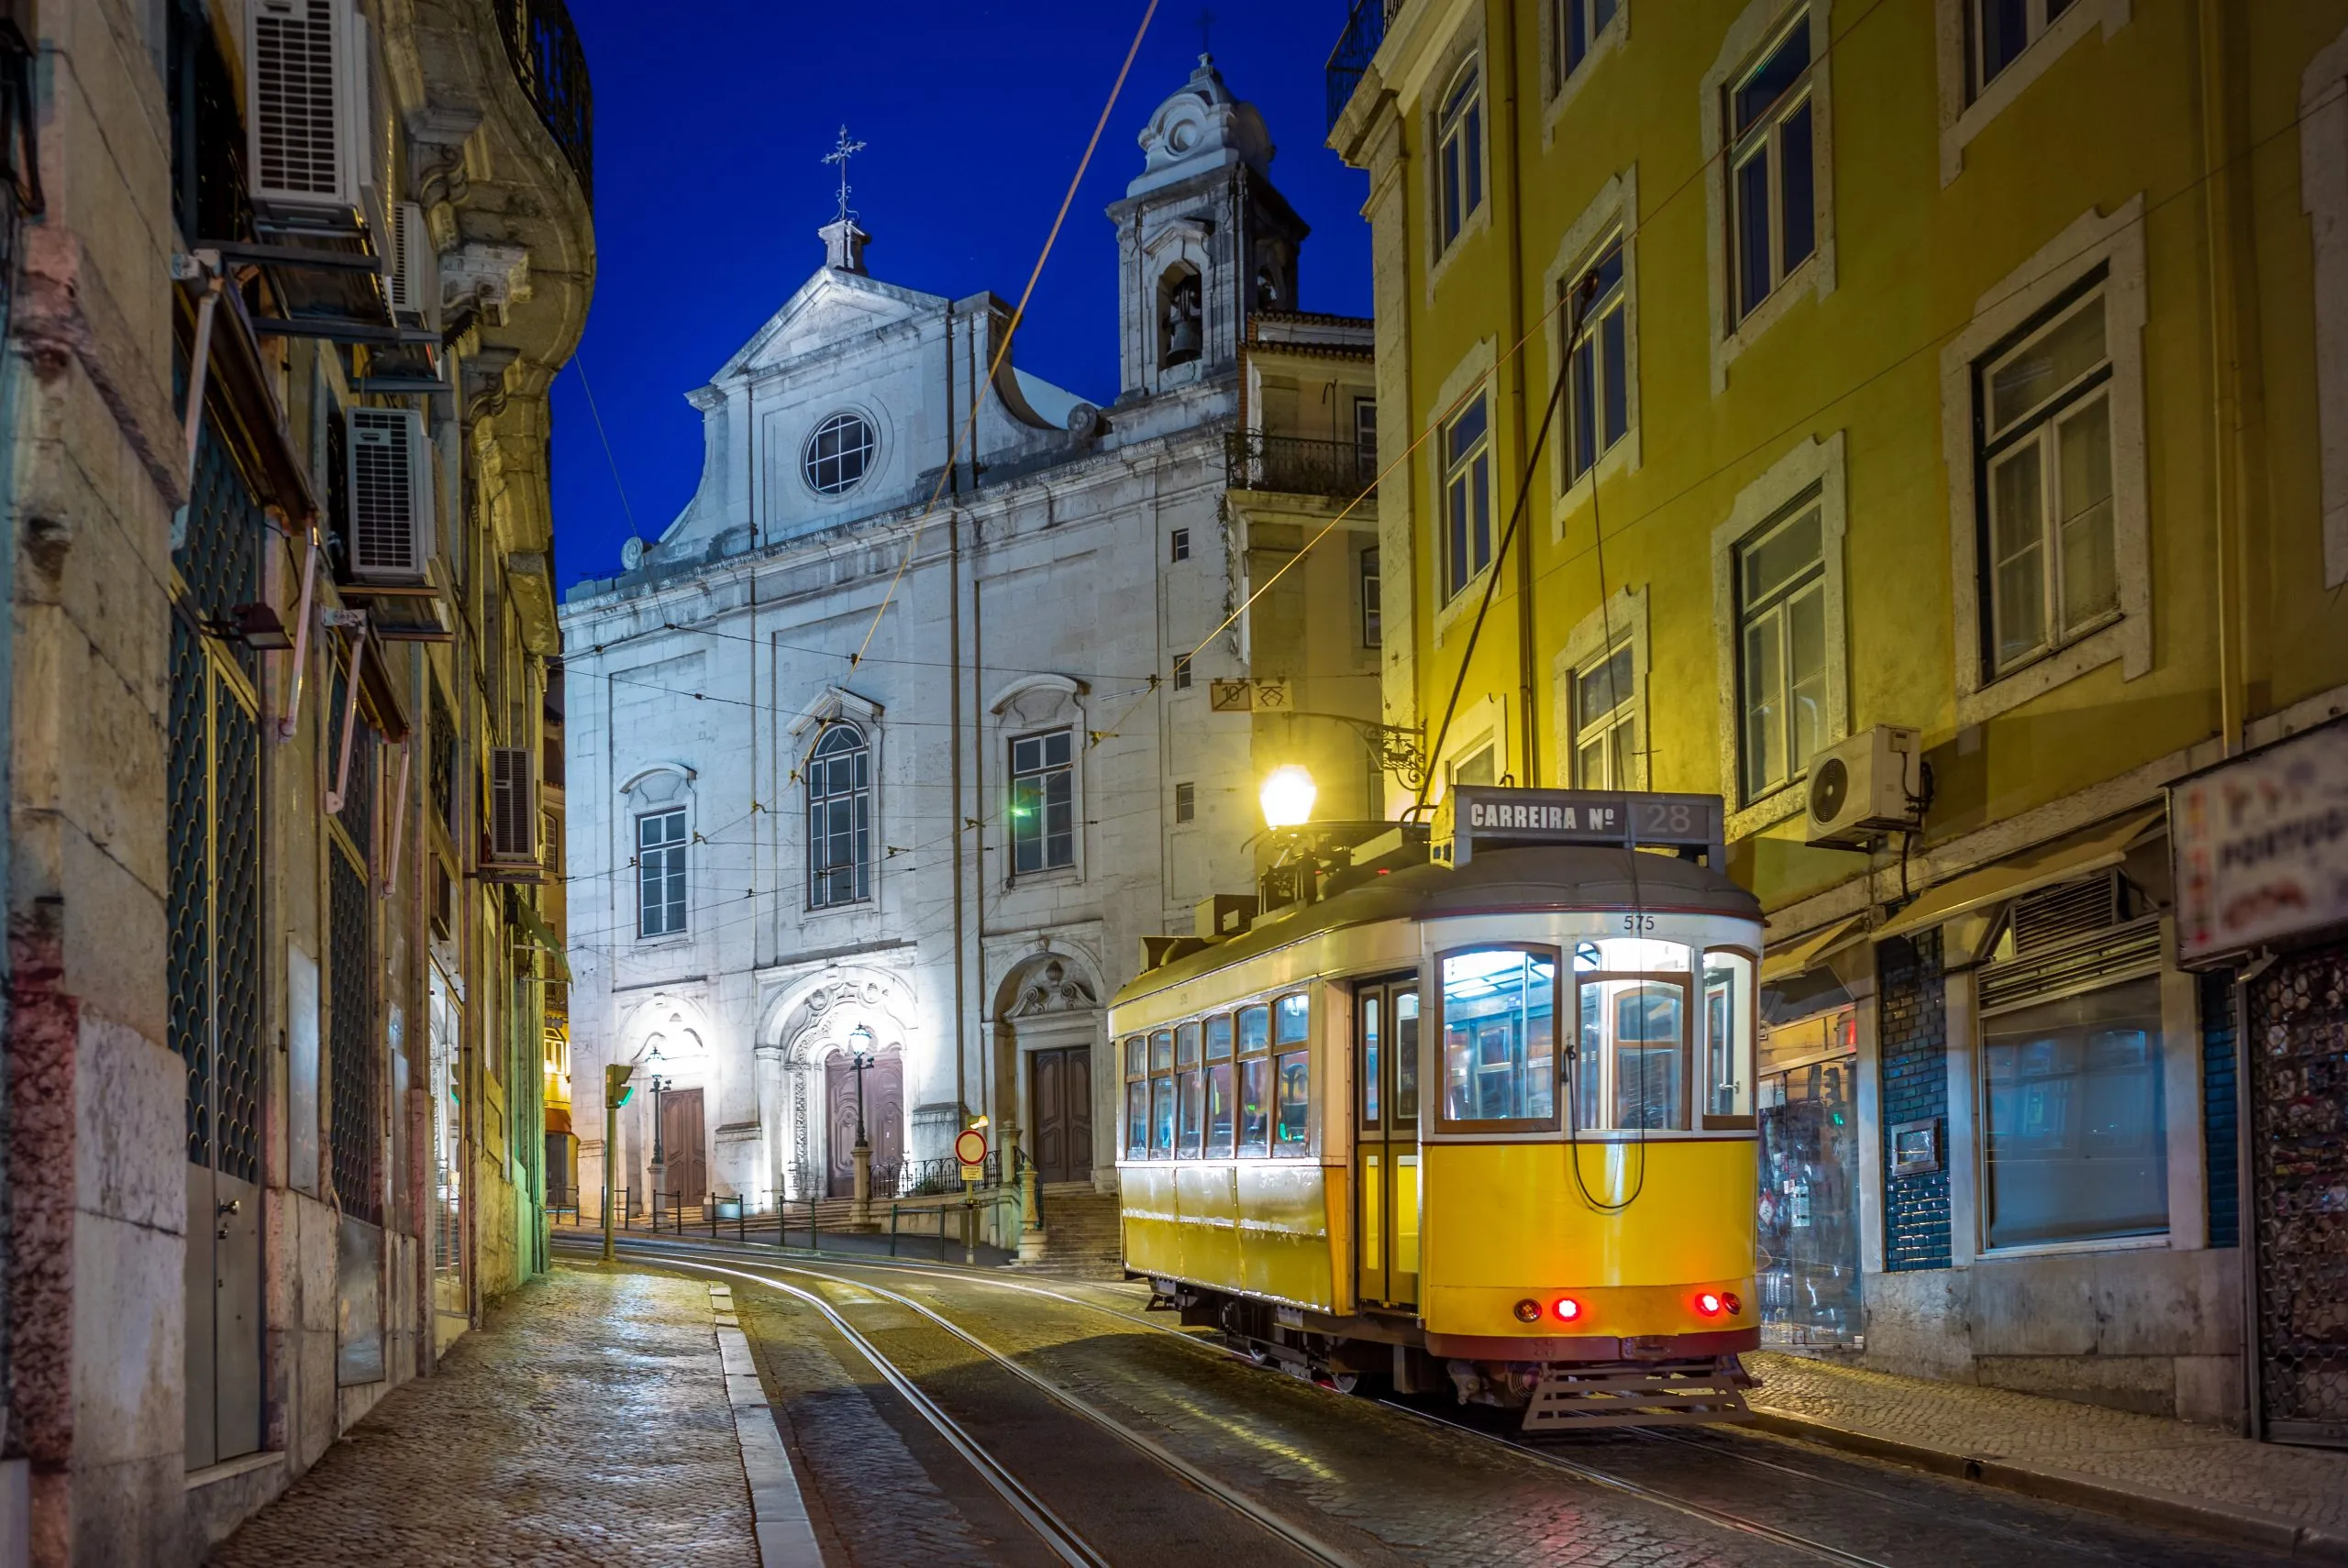 lisbon tram 28 passing a church, best things to do in lisbon at night